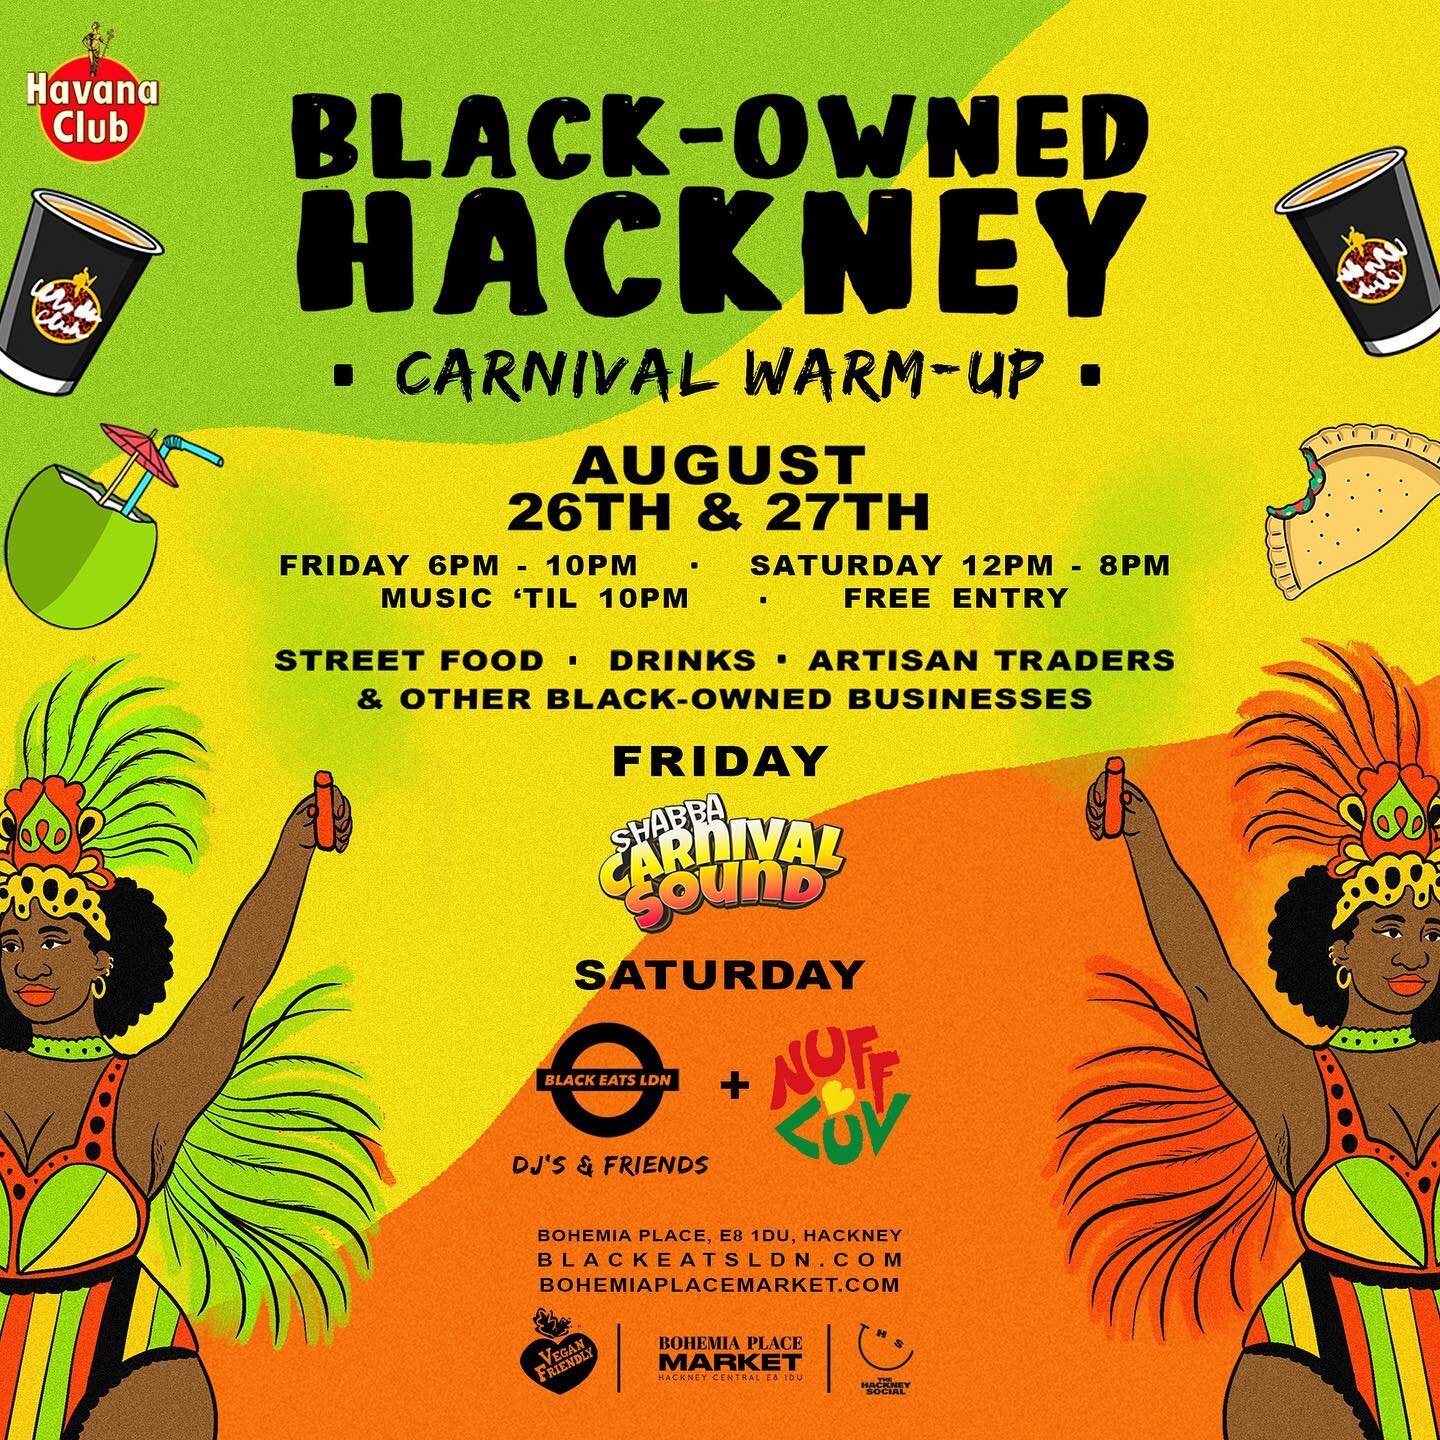 This Friday &amp; Saturday is about to be a movie🎥✨📣

Come and find us here 📣 stall and products ready!

CARNIVAL WARM-UP 2022❤️💛💚

📆 AUGUST 26TH &amp; 27TH
⌚ FRI 6-10 PM &amp; SAT 12-8 PM
📍 Bohemia Place, Hackney Central, E8 1DU
🔊 DJs til 10